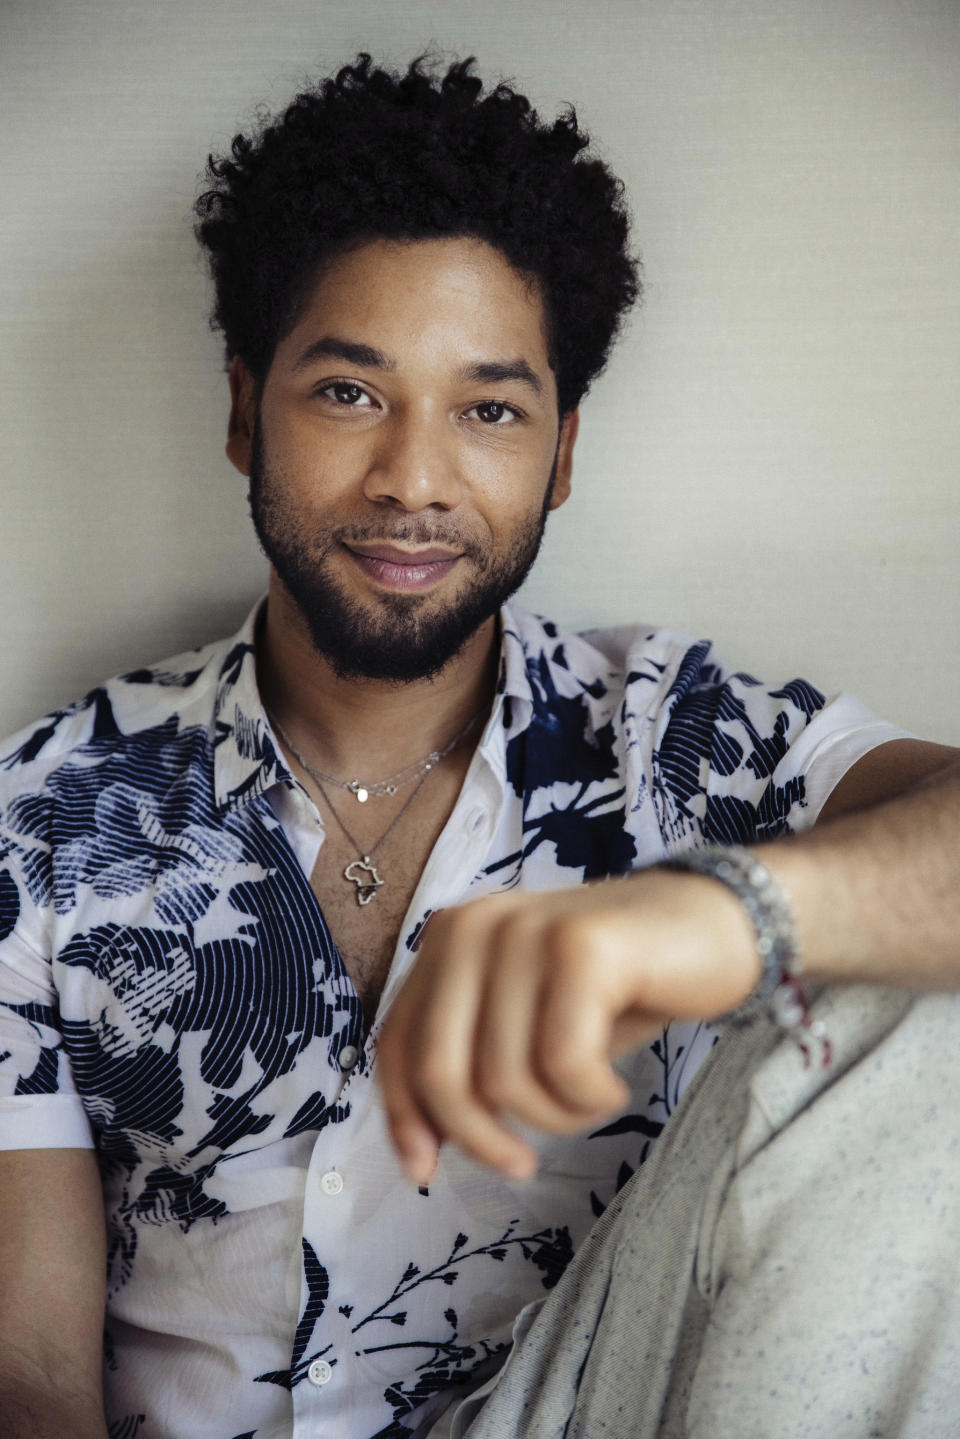 FILE - In this March 6, 2018 file photo, actor-singer Jussie Smollett, from the Fox series, "Empire," poses for a portrait in New York. Chicago police have opened a hate crime investigation after a man the department identified as a 36-year-old cast member of the television show “Empire” alleged he was physically attacked by men who shouted racial and homophobic slurs. Police wouldn’t release the actor’s name, but a statement from the Fox studio and network on which “Empire” airs identified him Tuesday, Jan. 29, 2019, as Jussie Smollett. (Photo by Victoria Will/Invision/AP, File)